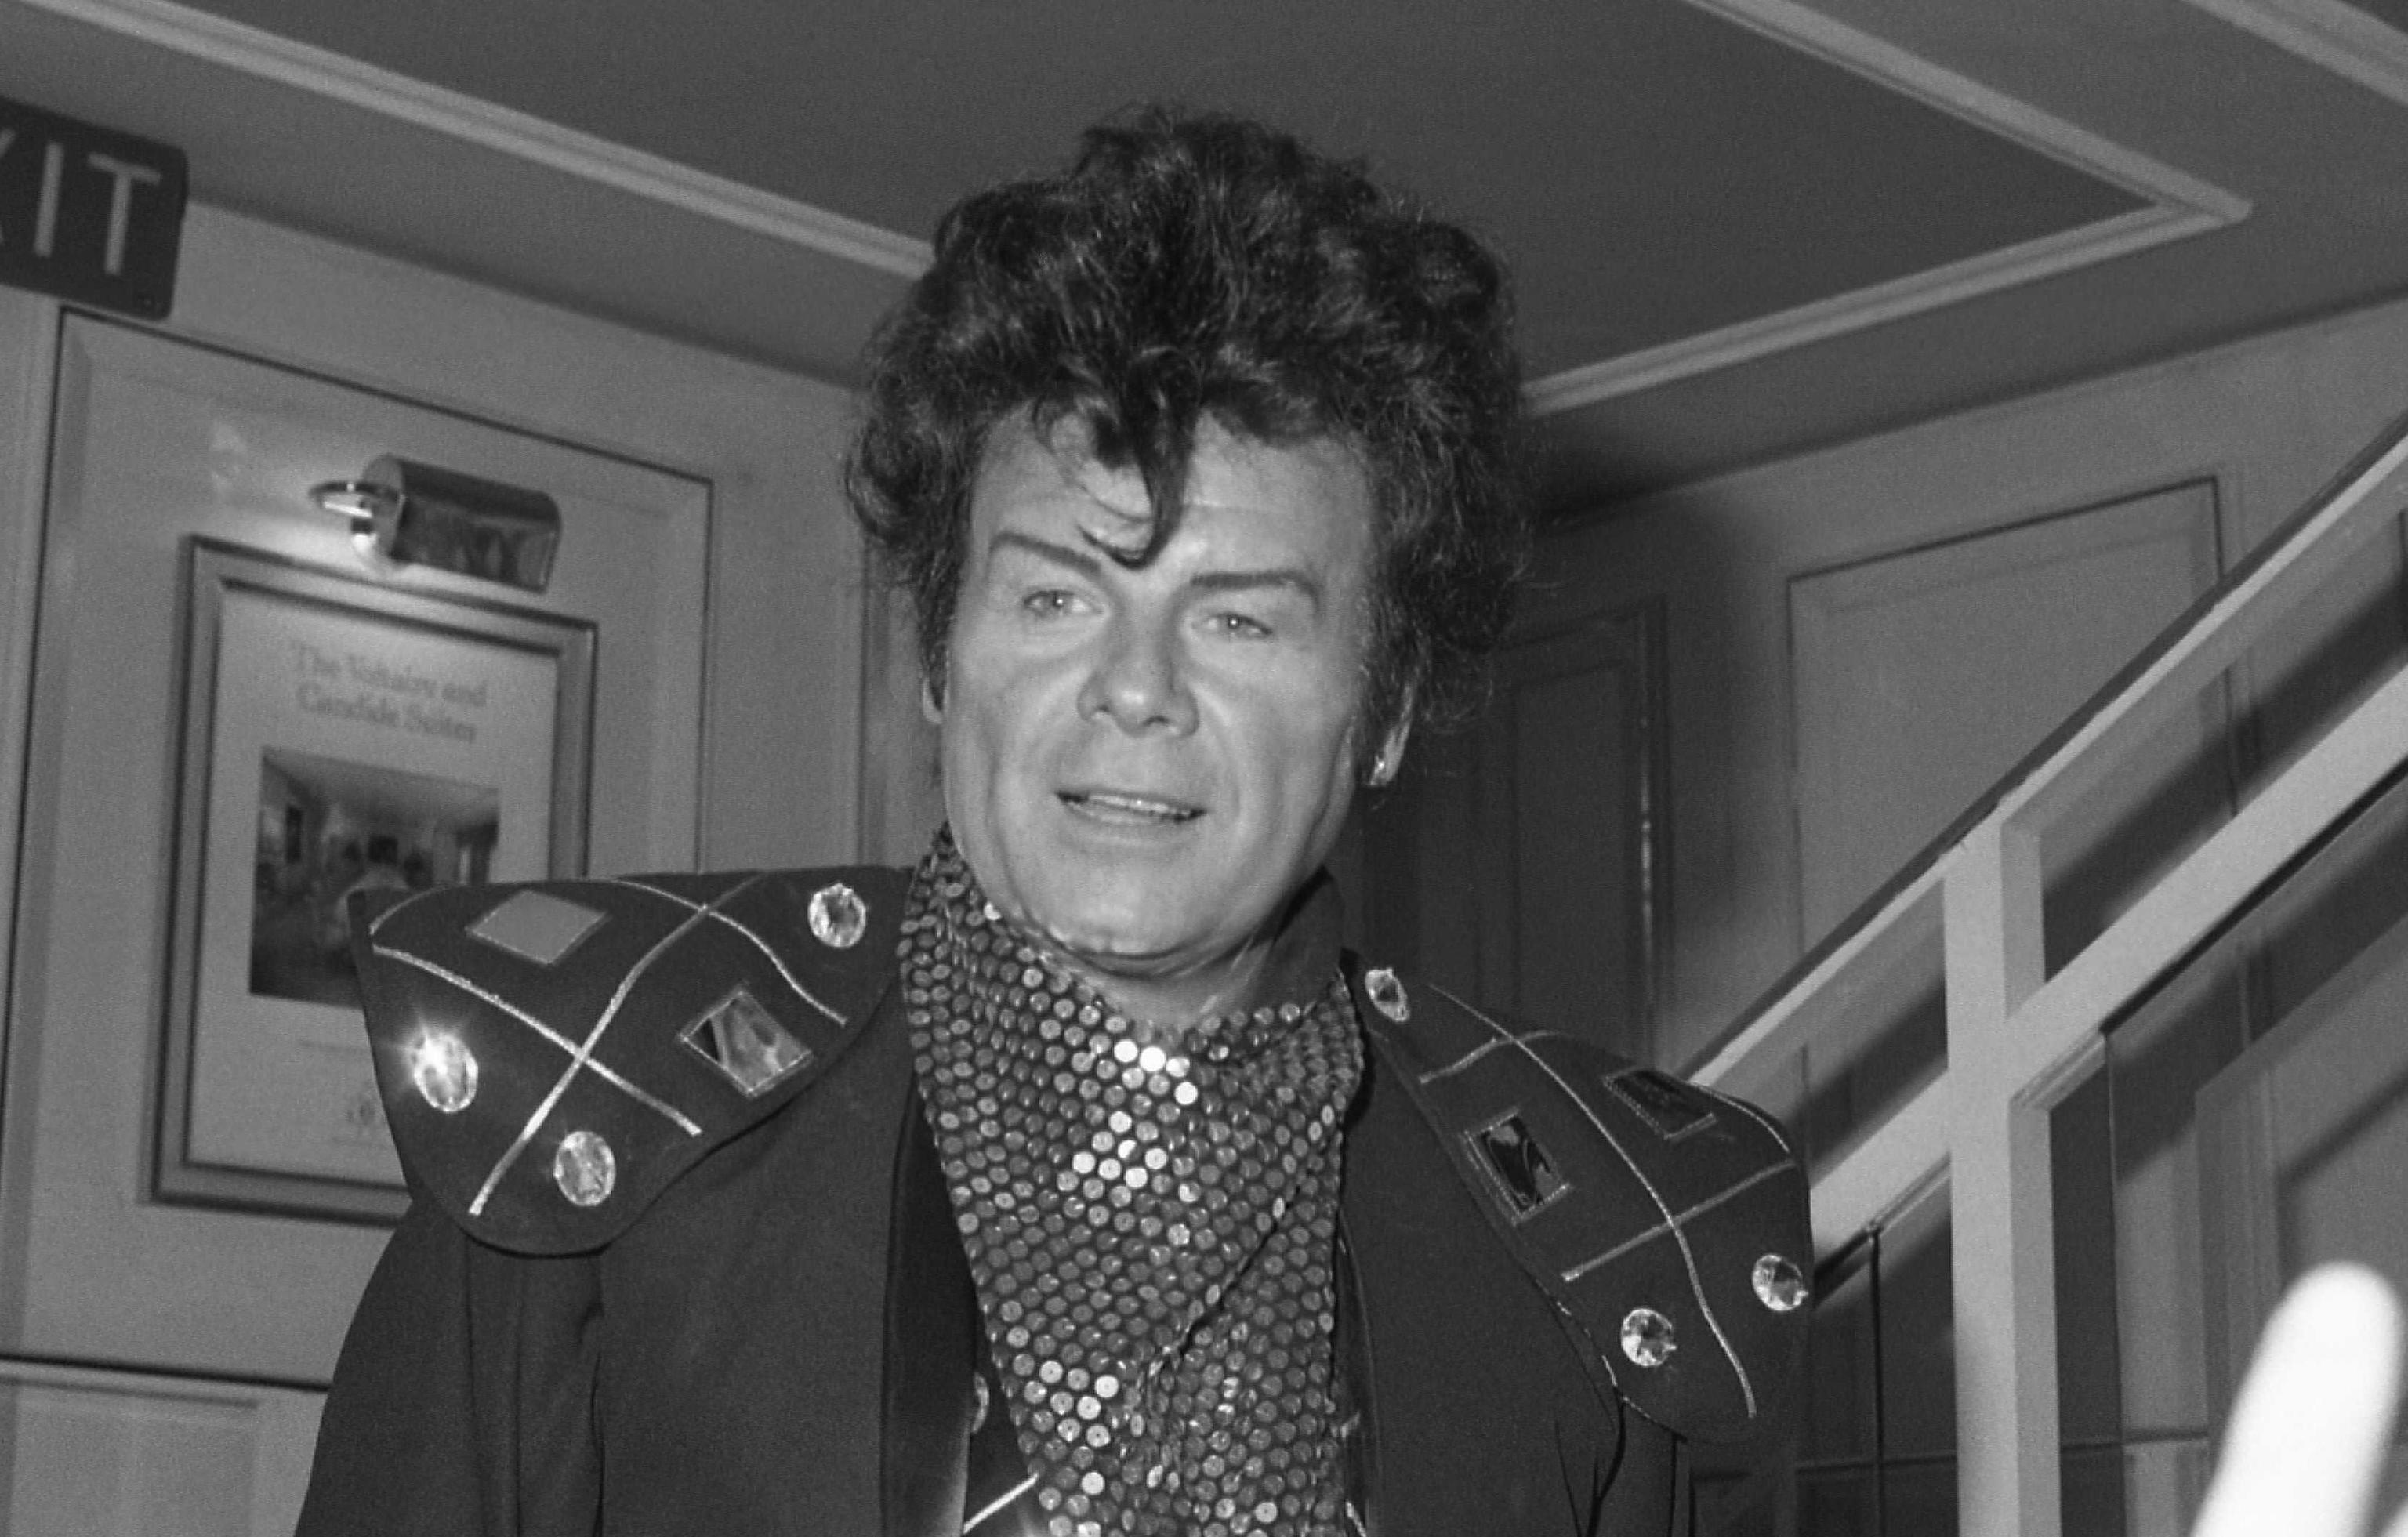 Gary Glitter, pictured in London in October 1990.